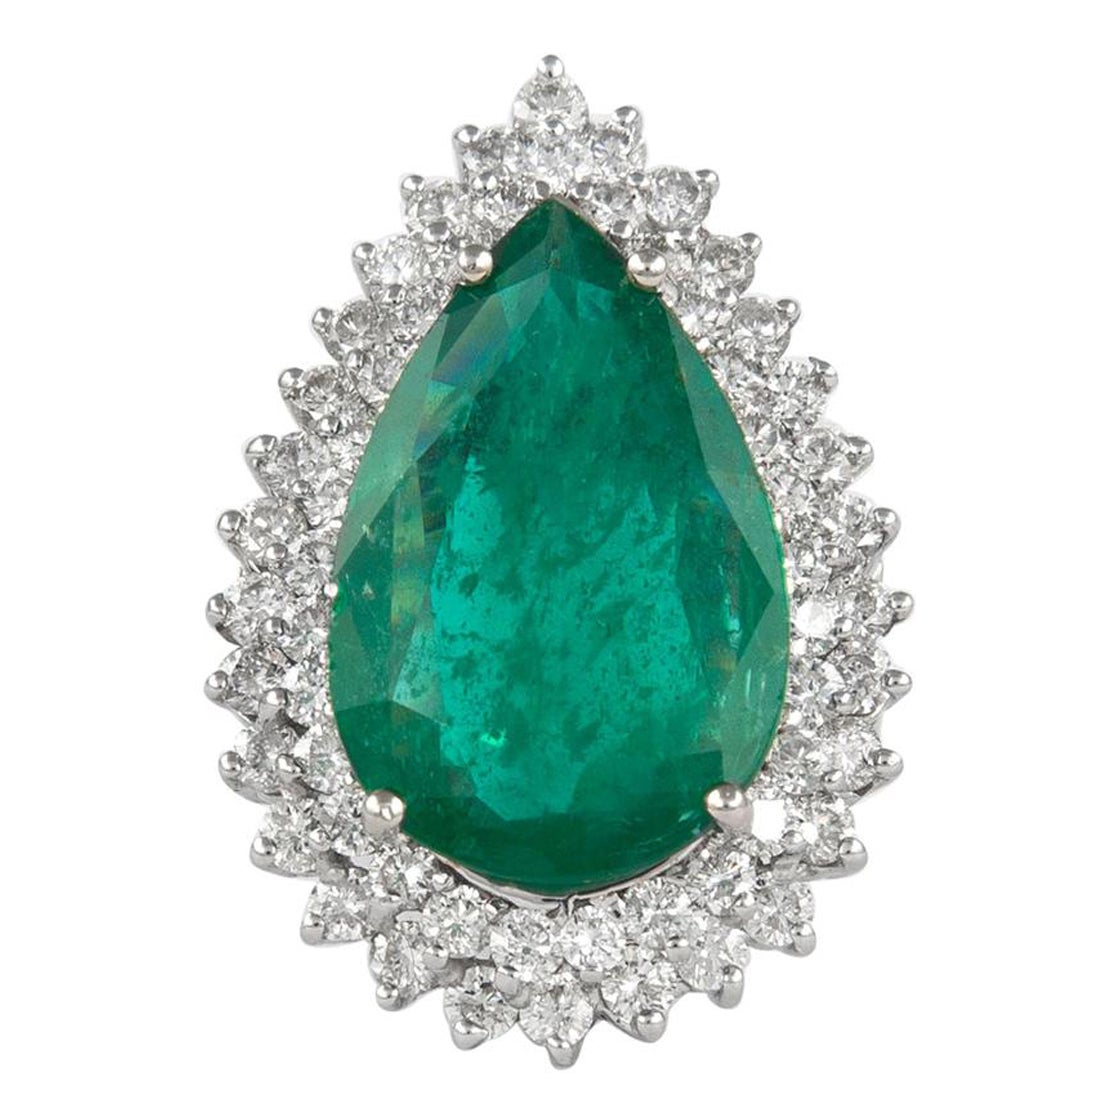 8.11 Carat Emerald with Double Diamond Halo Ring 18 Karat White Gold For Sale